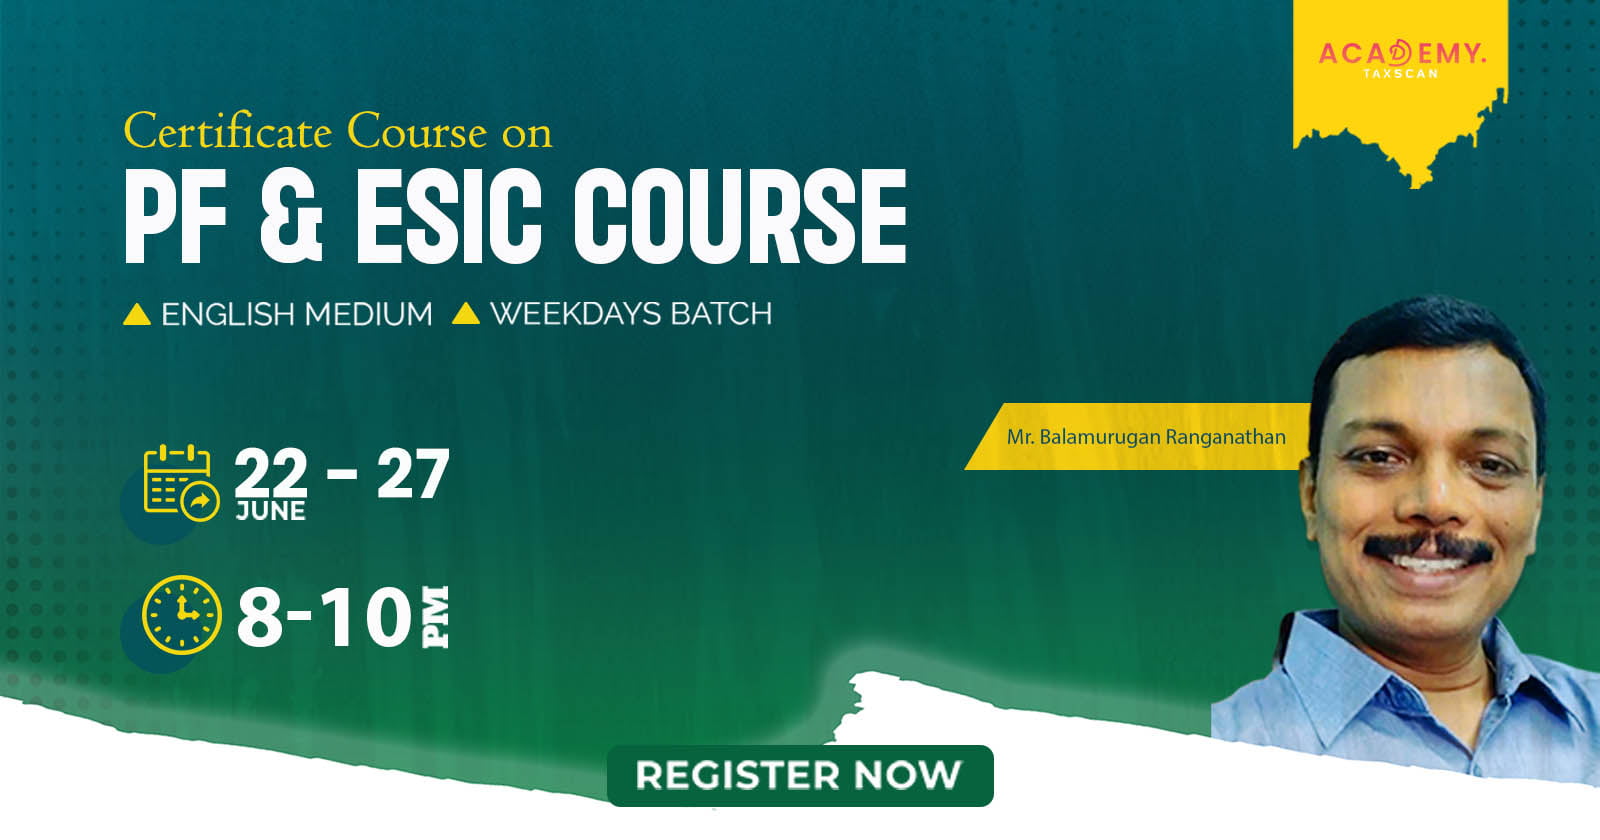 PF - ESIC - ESIC Course - Certificate Course - online certificate course - Course 2023 - Course - new - newcourse - new course 2023 - certificate course 2023 - online certificate course 2023 - taxscan academy